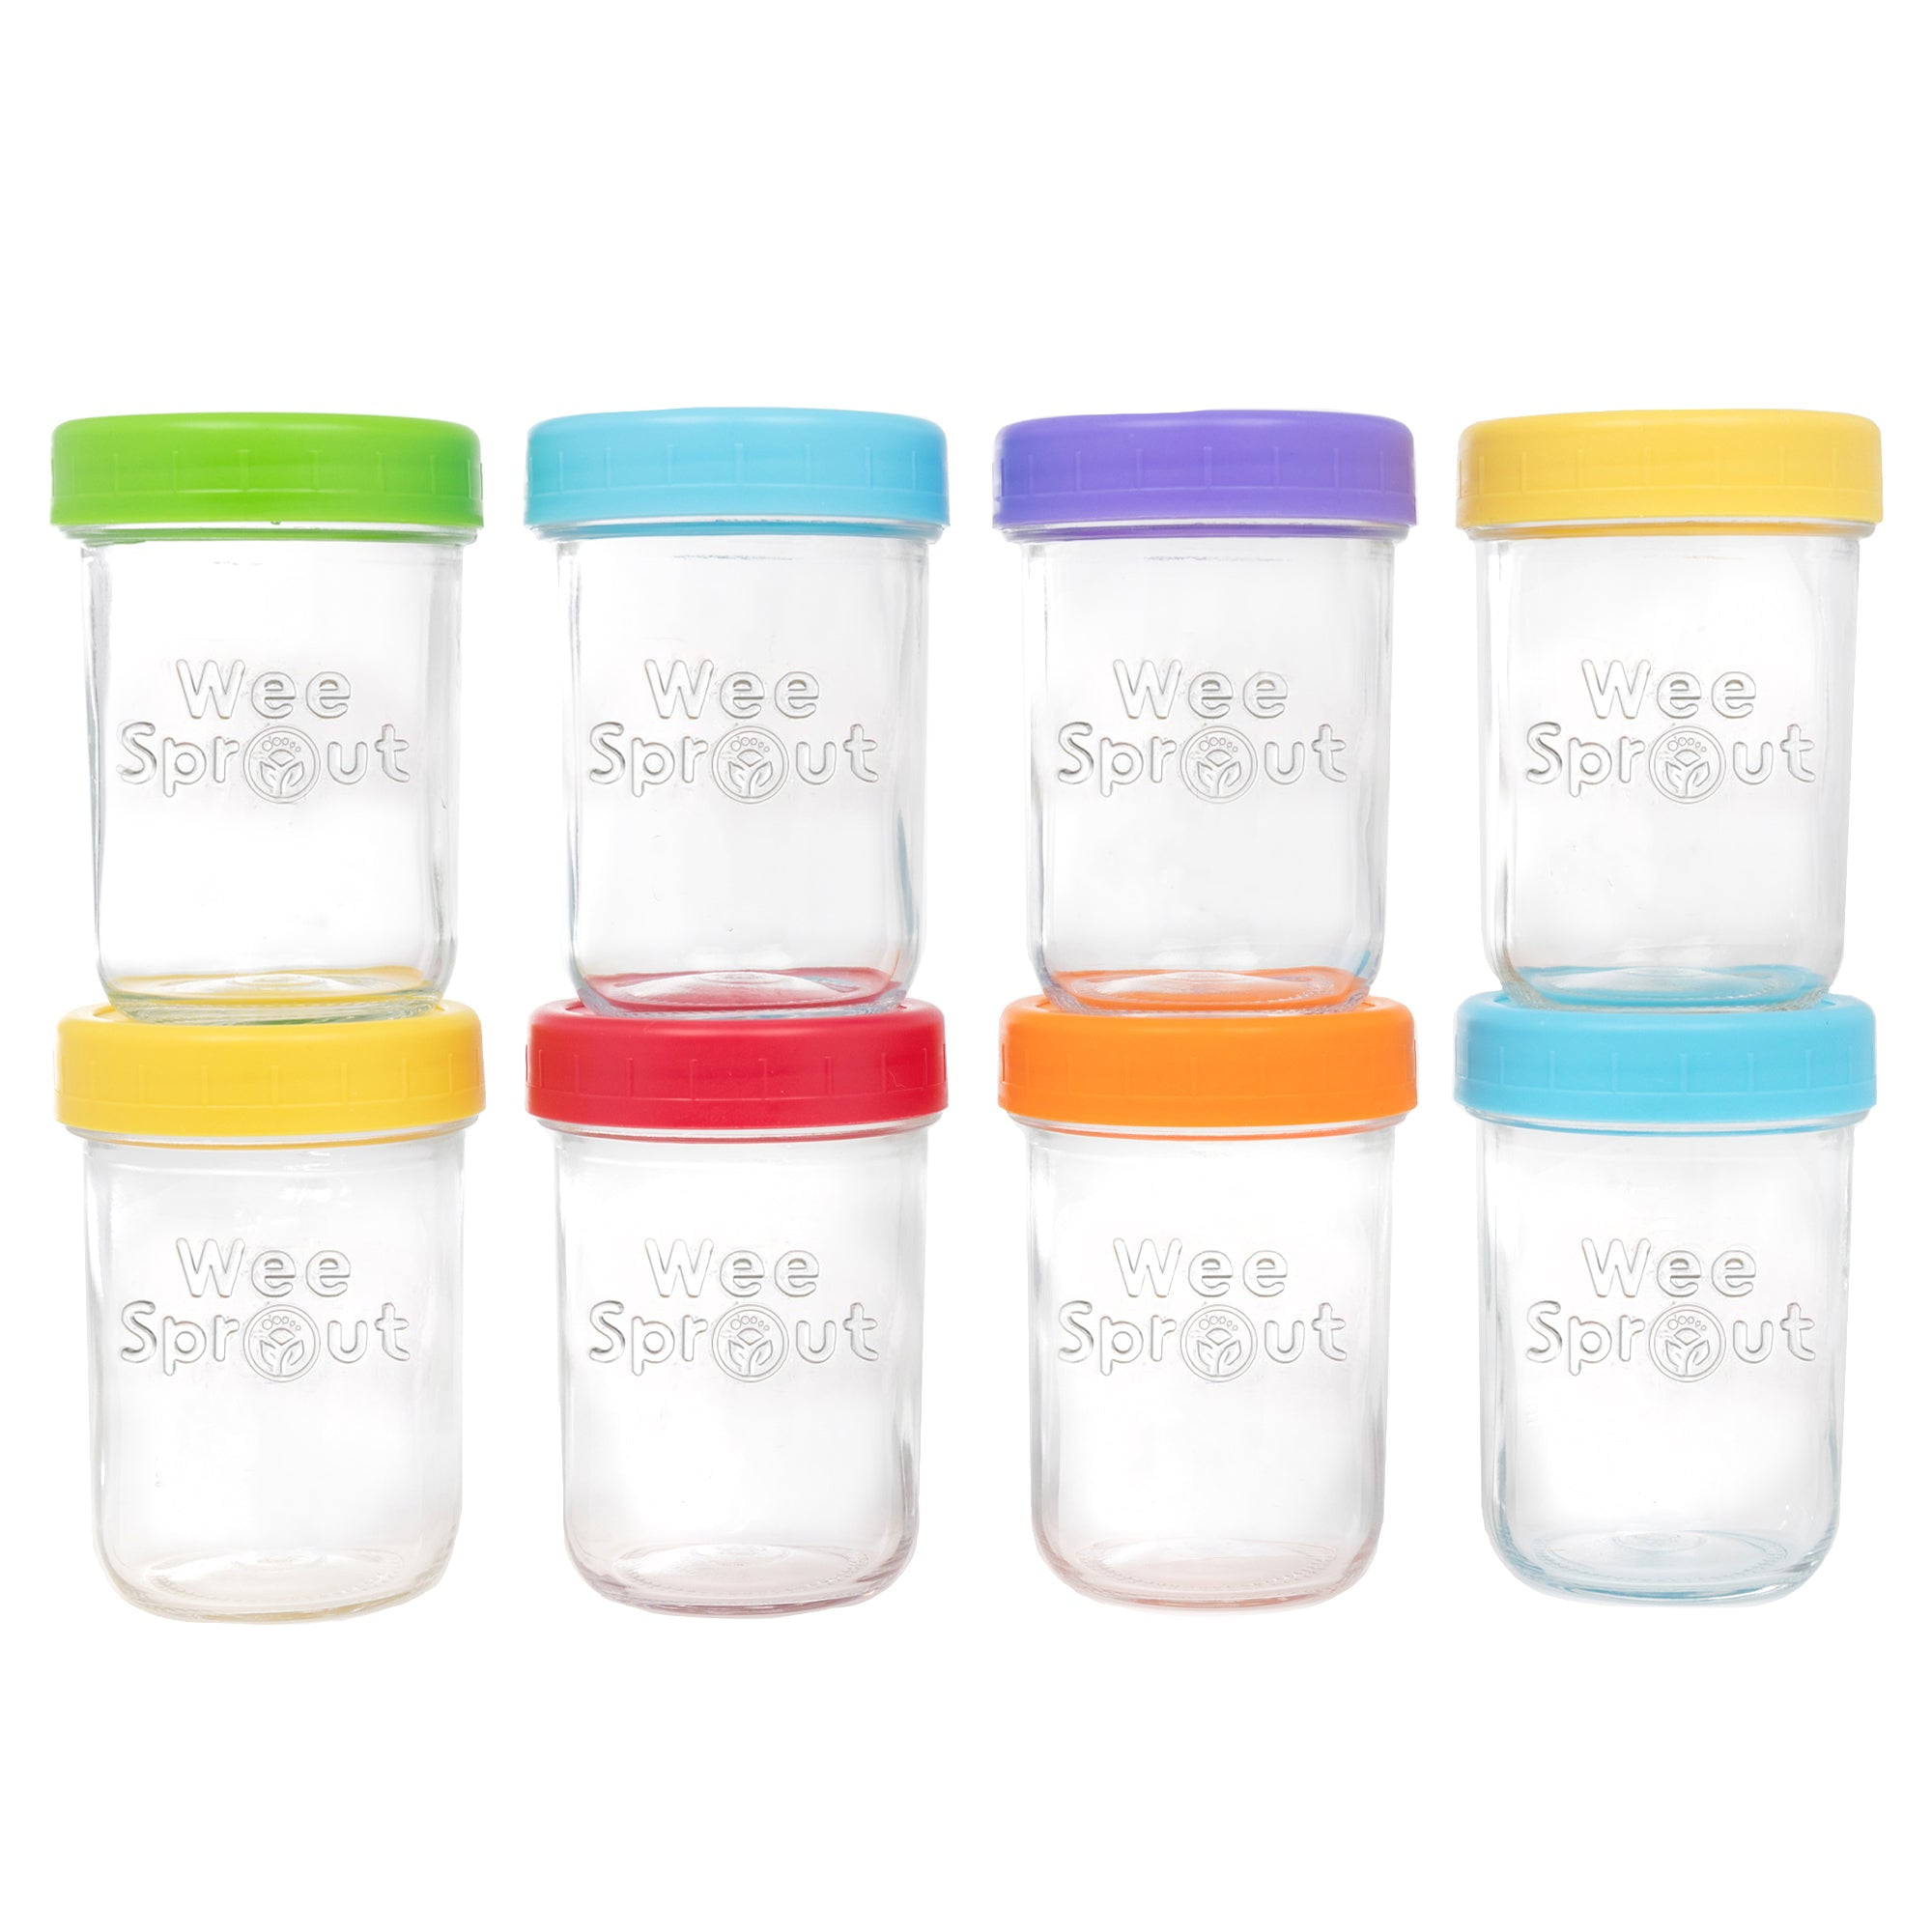 GENEMA Baby Food Containers By Little Sprout: Reusable Stackable Storage  Cups with Tray